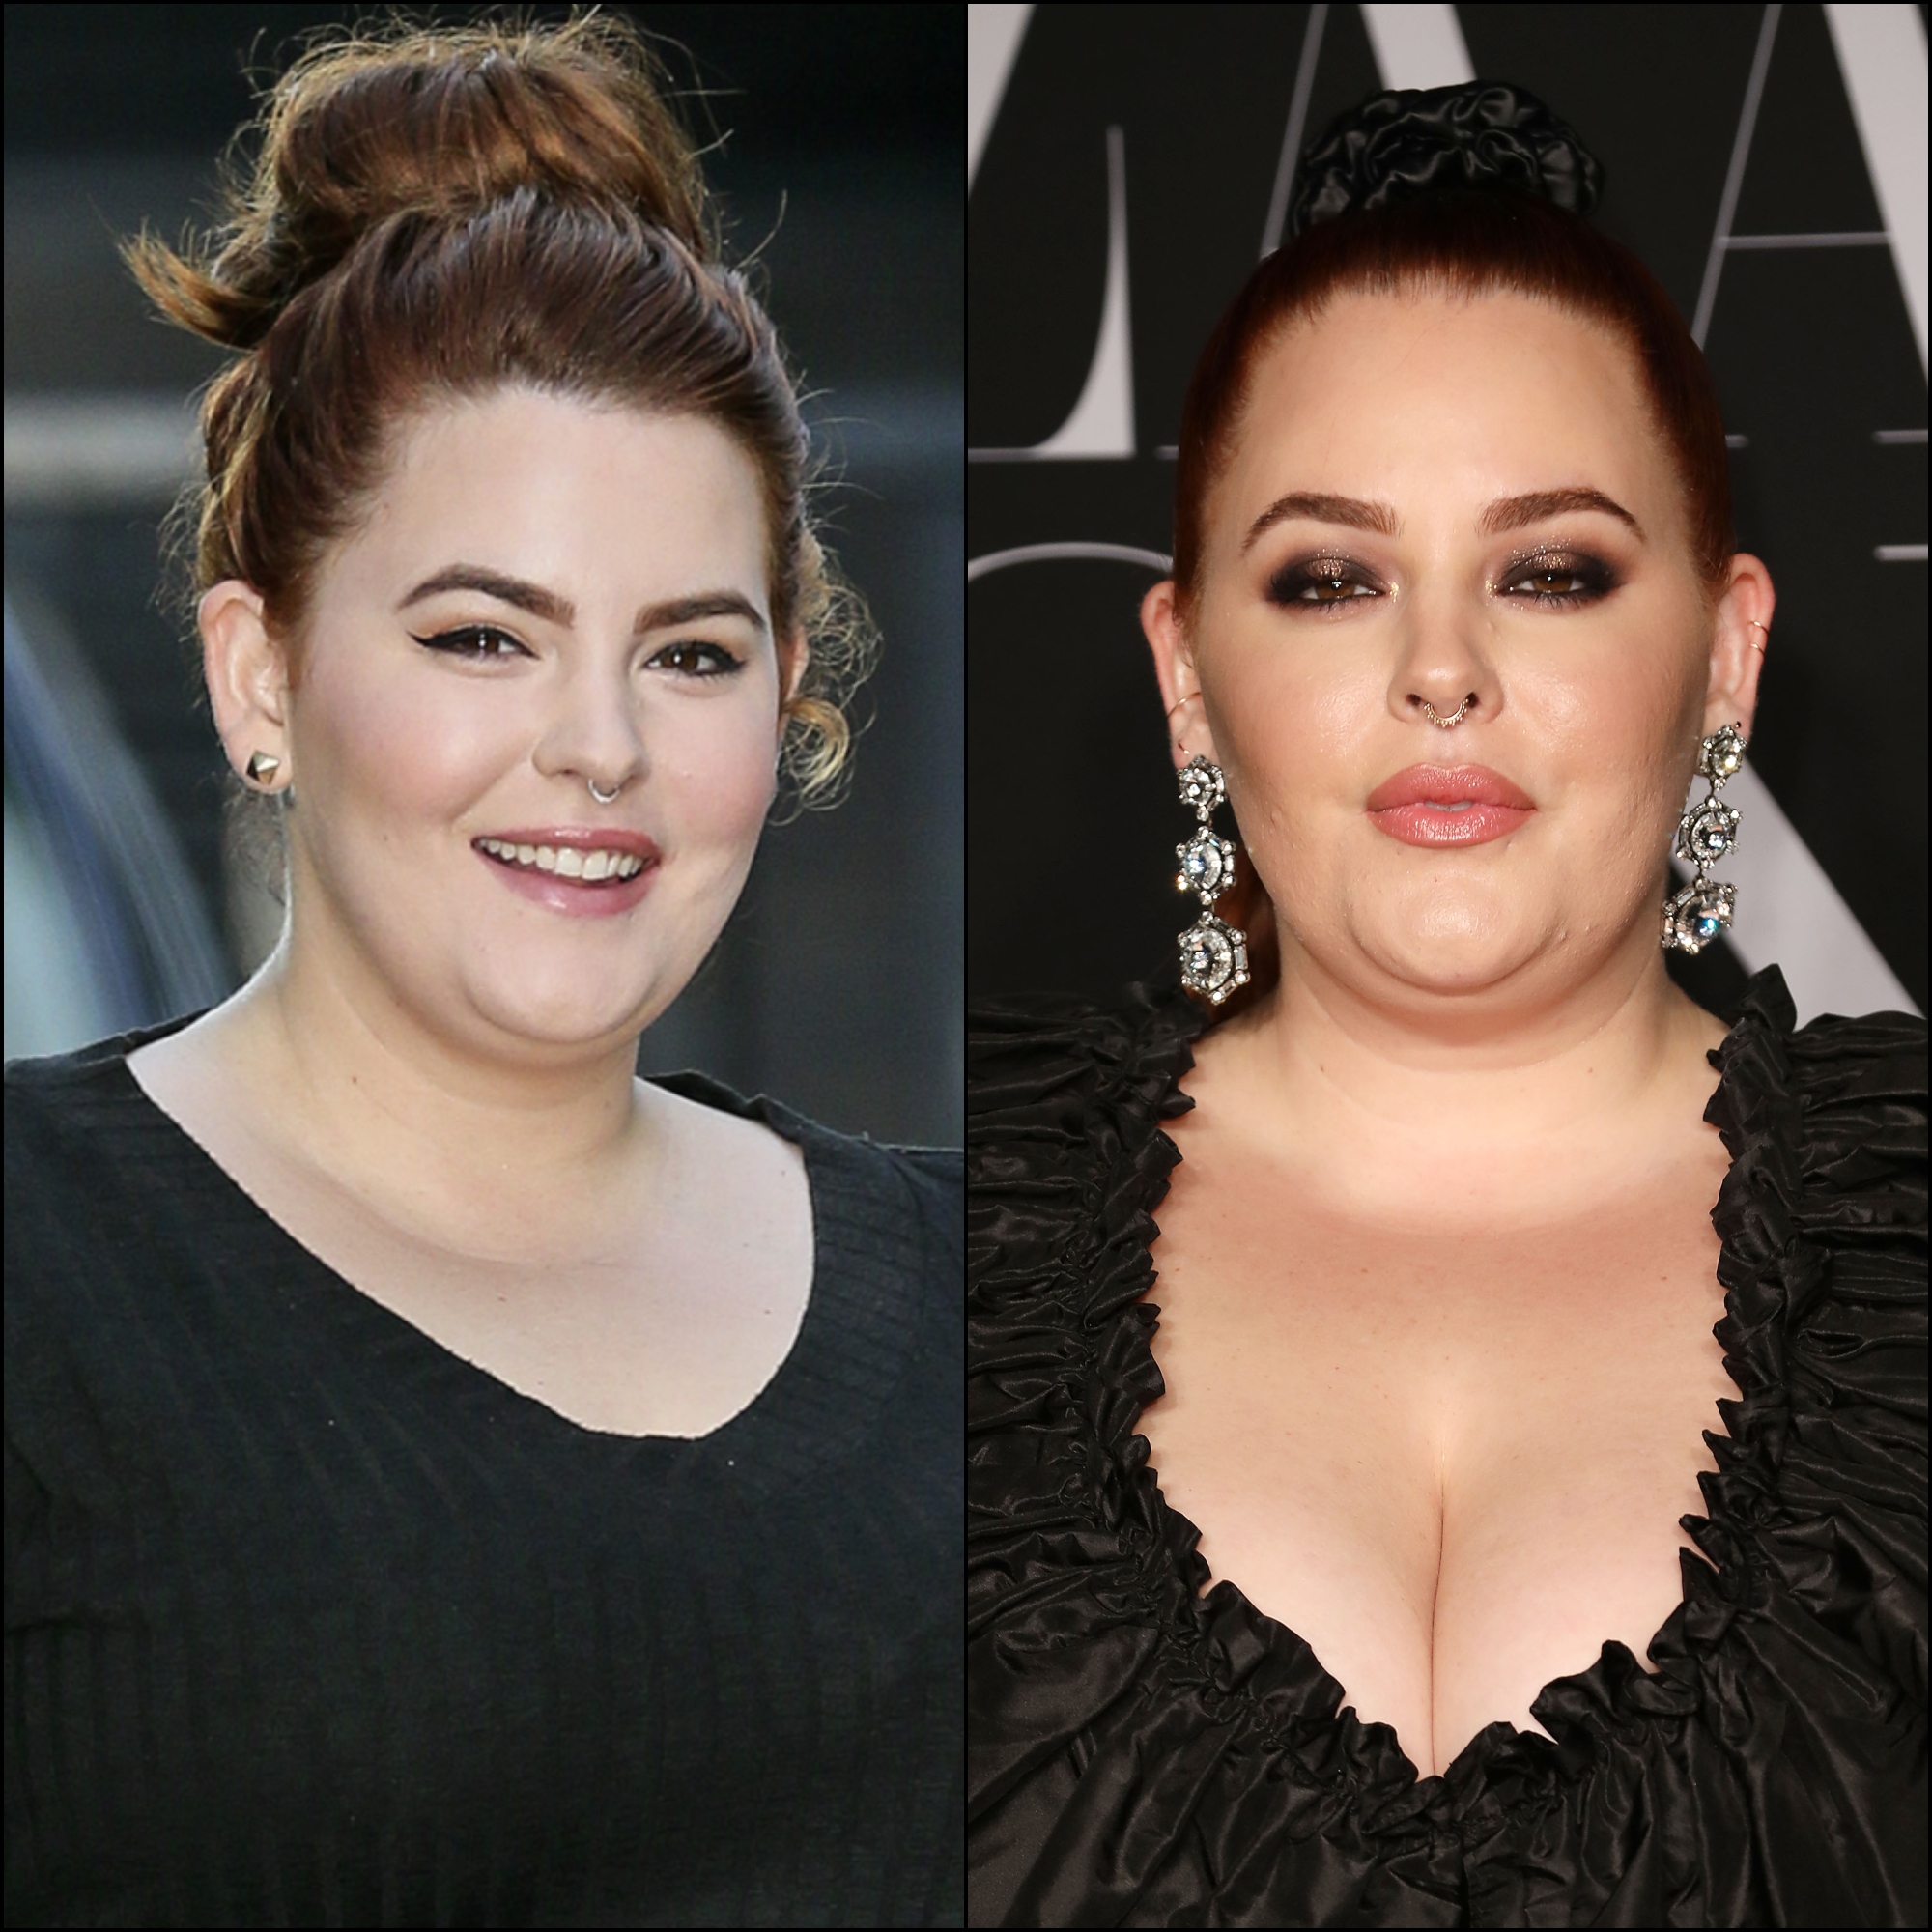 https://www.lifeandstylemag.com/wp-content/uploads/2019/12/tess-holliday-2015-2019-plastic-surgery.jpg?fit=2000%2C2000&quality=86&strip=all